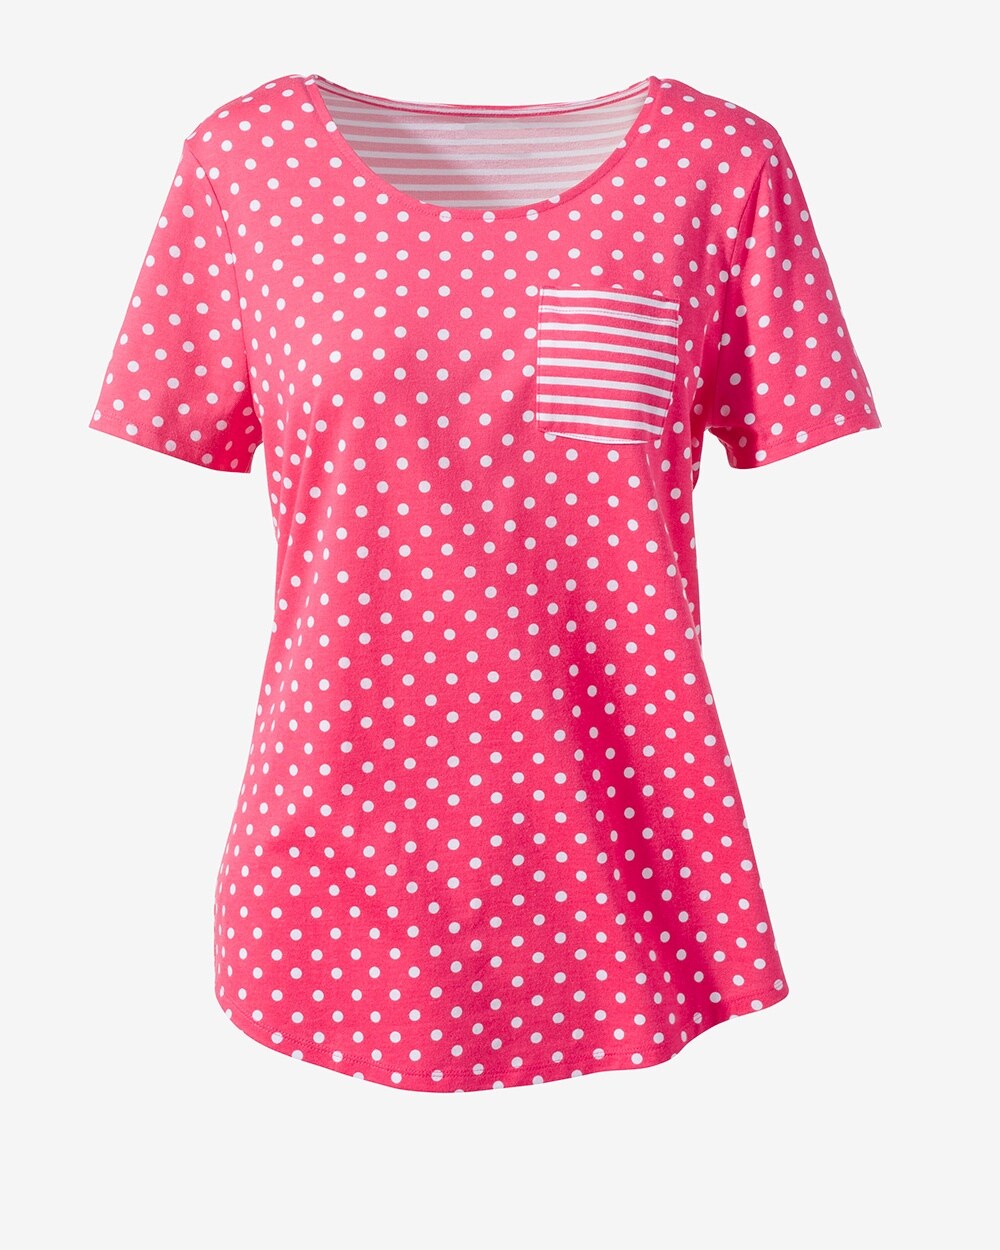 Dots and Stripes Pocket Tee